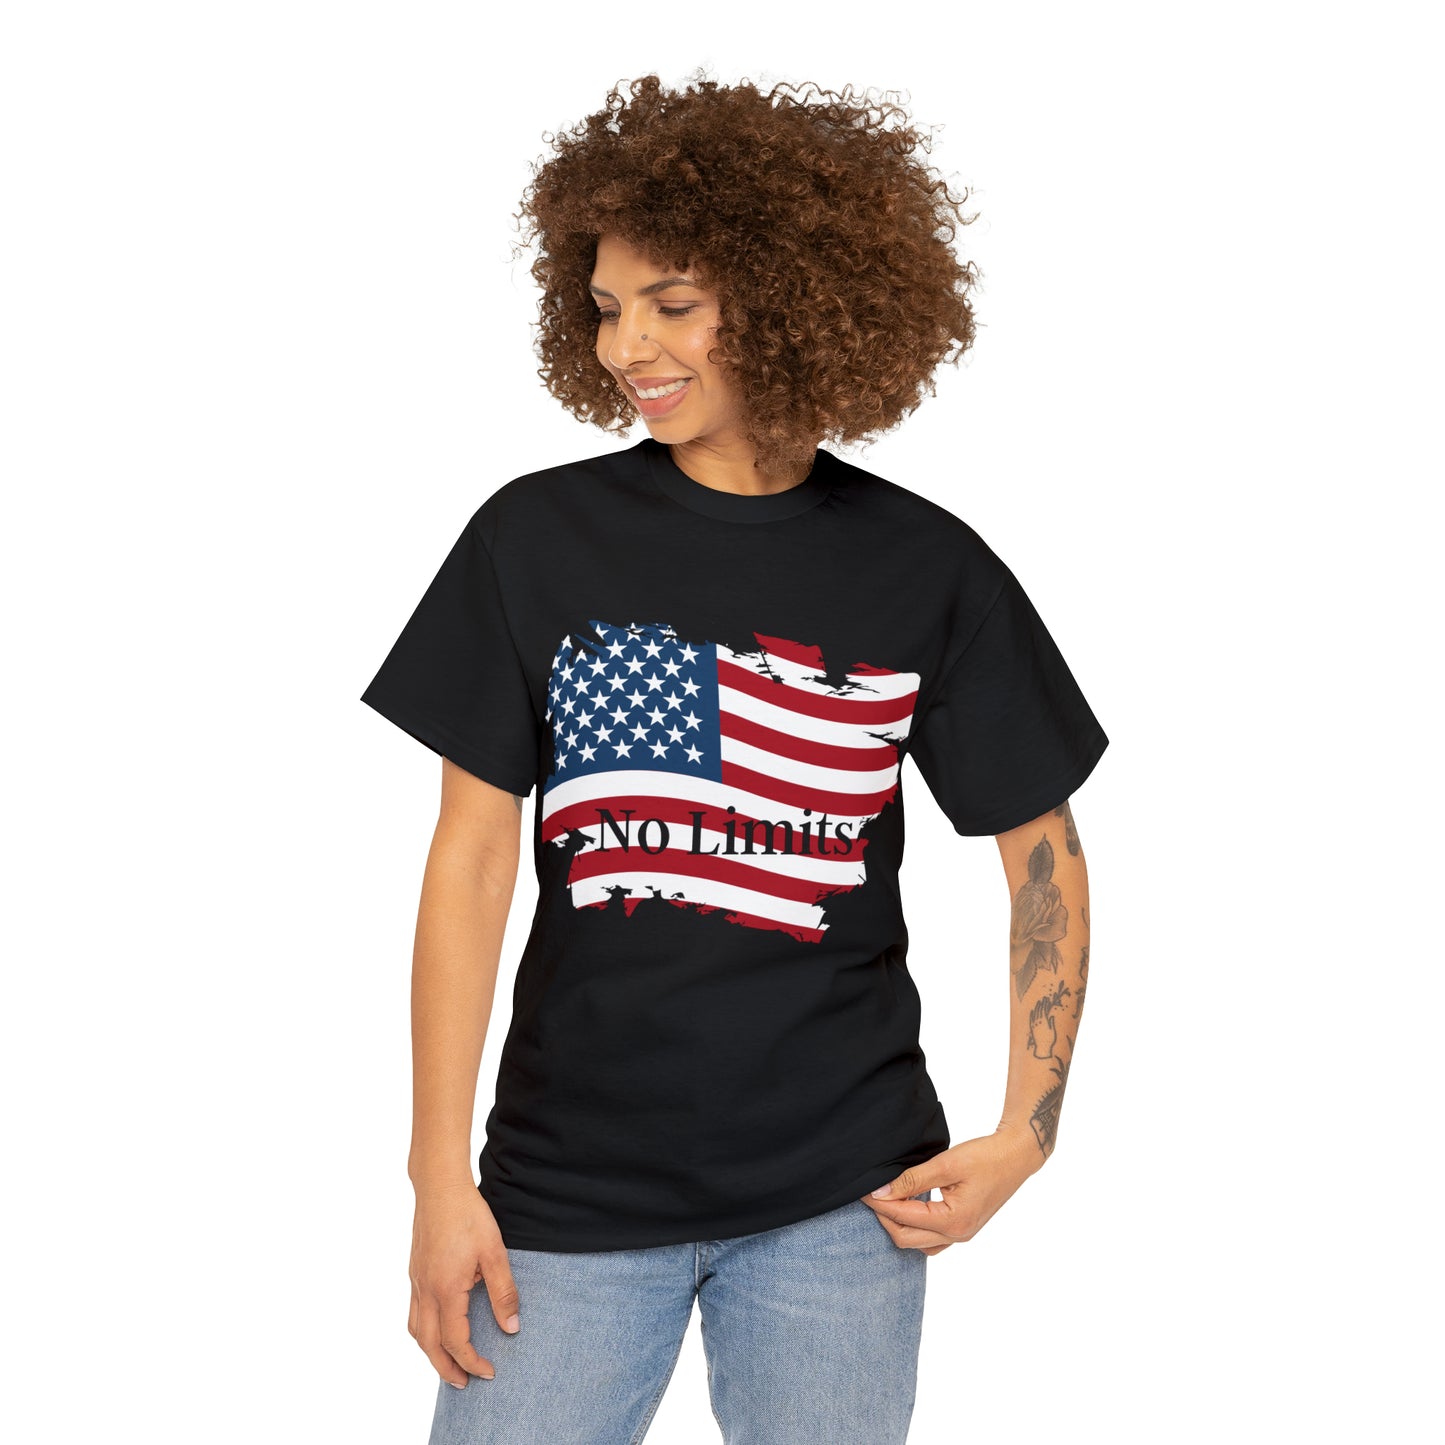 Unisex T-shirt,Unique style with USA flag,Perfect gift